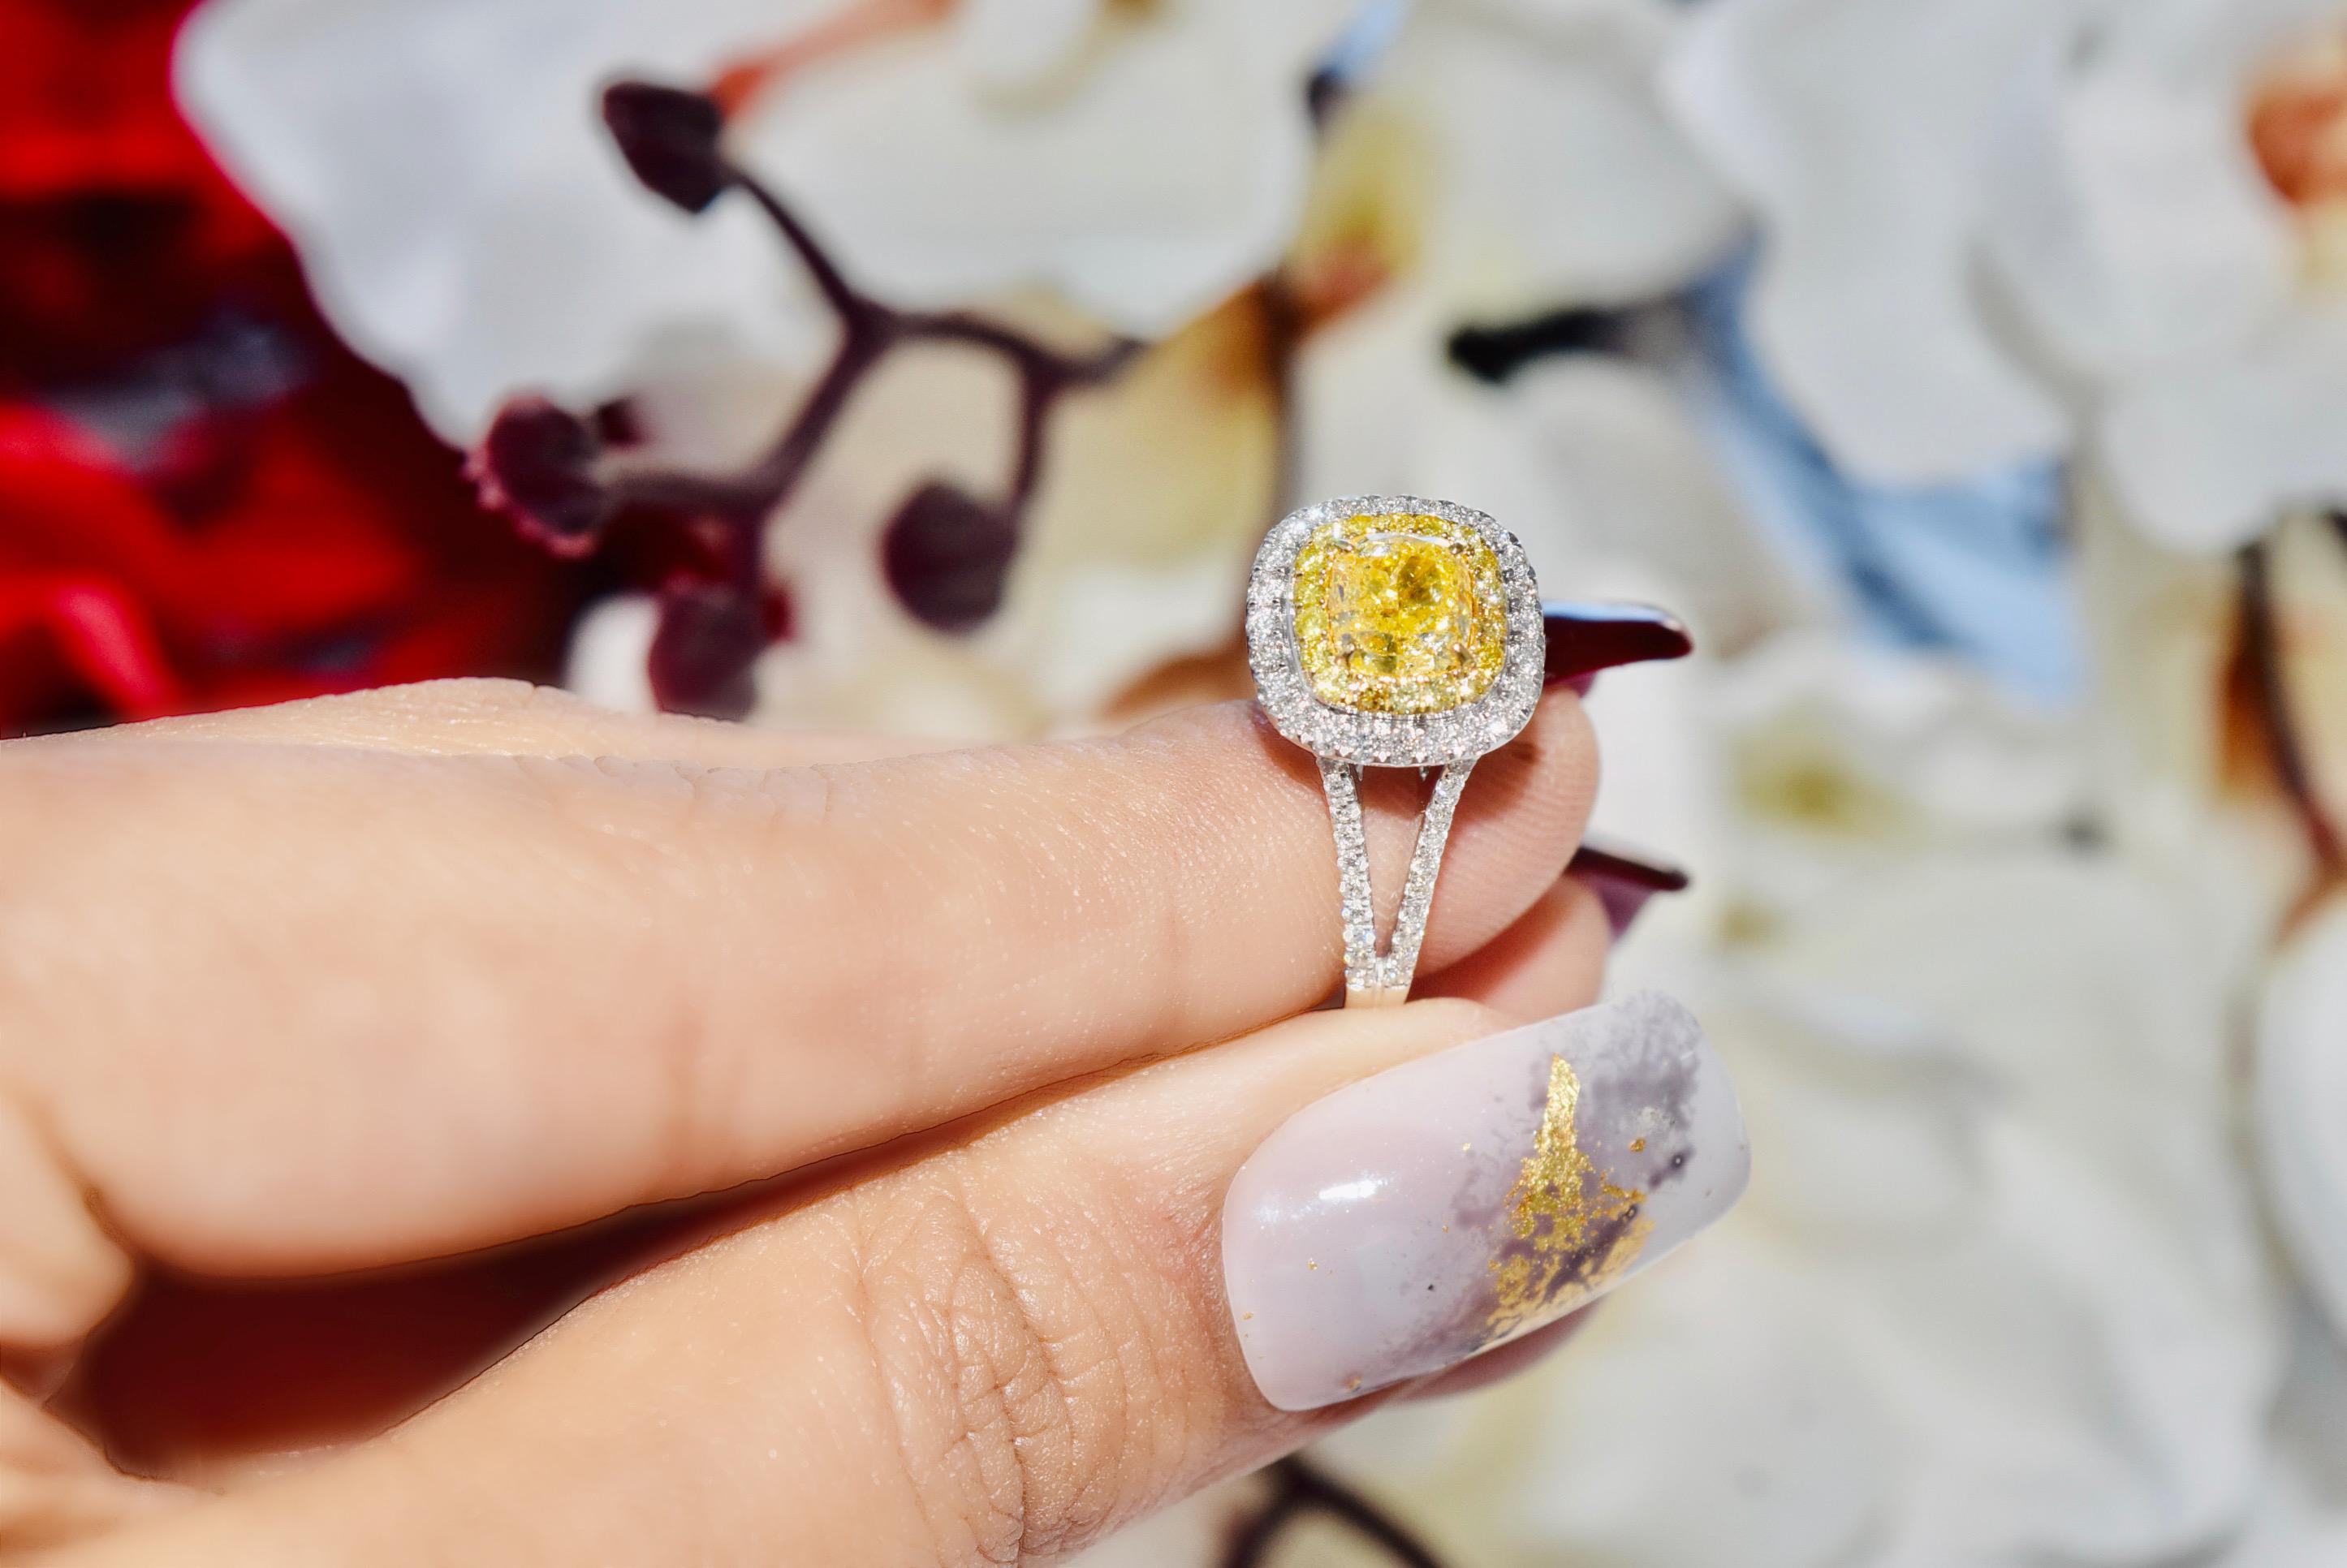 **100% NATURAL FANCY COLOUR DIAMOND JEWELRY**

✪ Jewelry Details ✪

♦ MAIN STONE DETAILS

➛ Stone Shape: Cushion
➛ Stone Color: Fancy yellow
➛ Stone Weight: 0.91 carats
➛ Clarity: I2
➛ GIA certified

♦ SIDE STONE DETAILS

➛ Side pink diamonds - 18